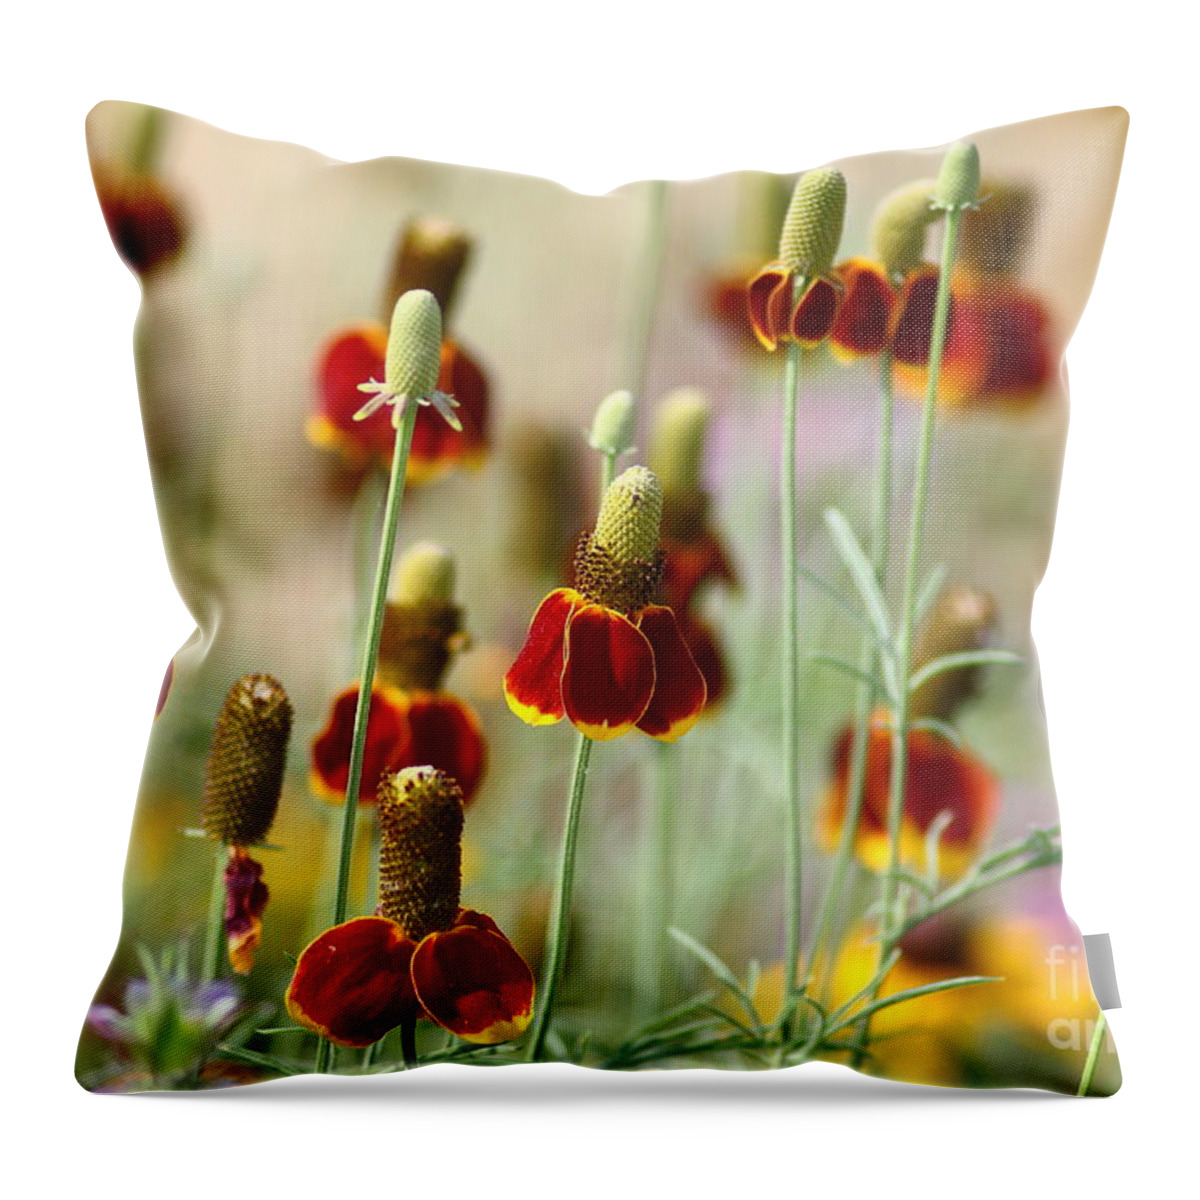 Flora Throw Pillow featuring the photograph The Wildest Of Flowers by Robert Frederick